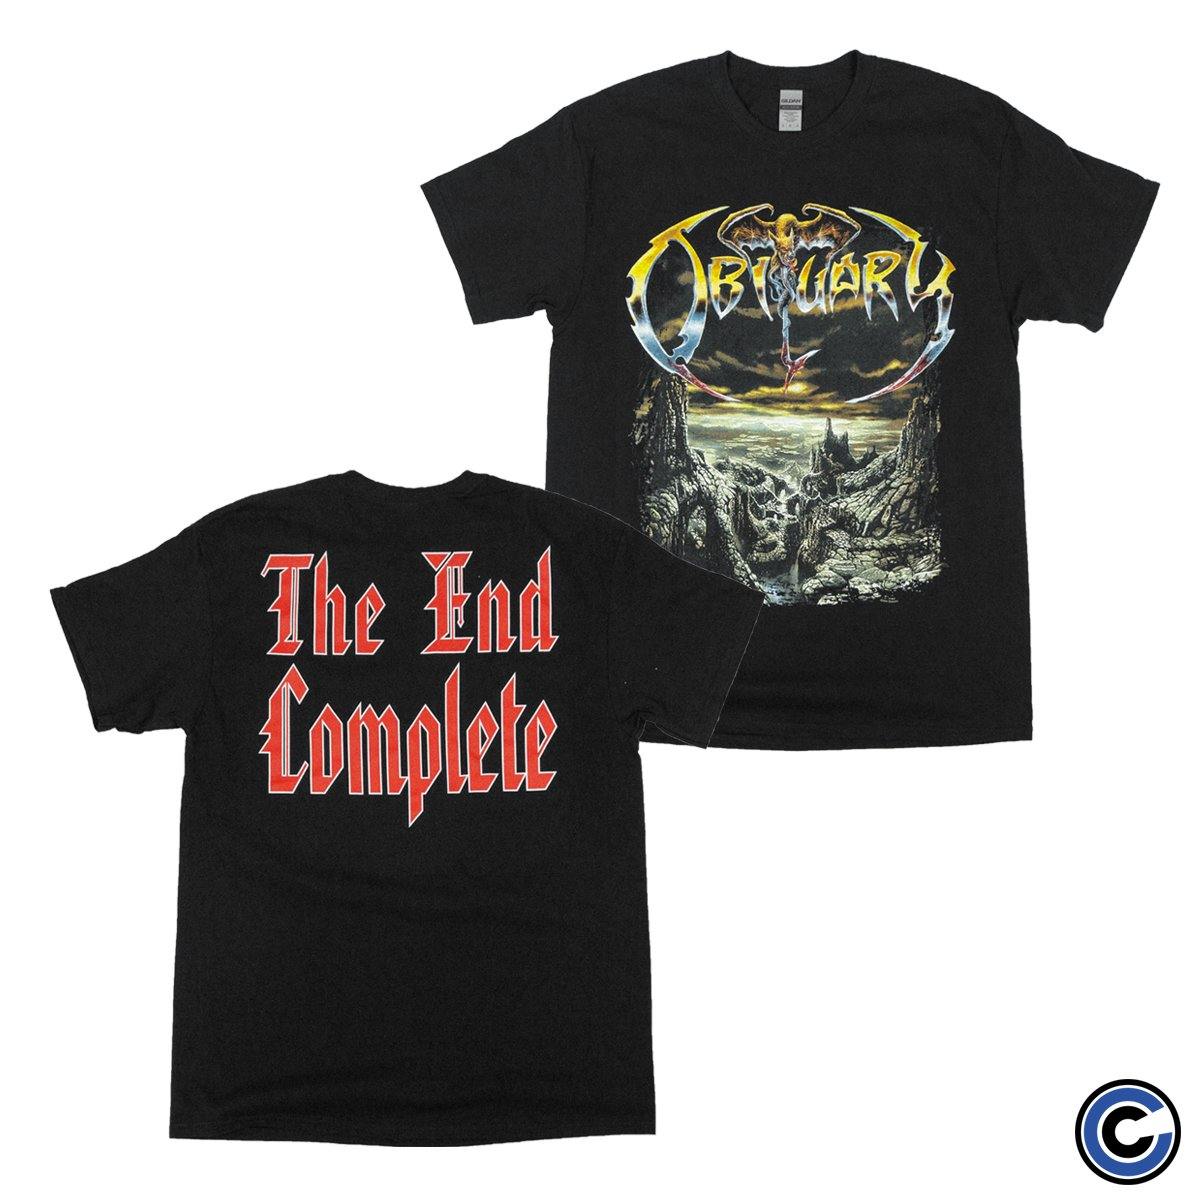 Buy – Obituary "The End Complete" Shirt – Band & Music Merch – Cold Cuts Merch